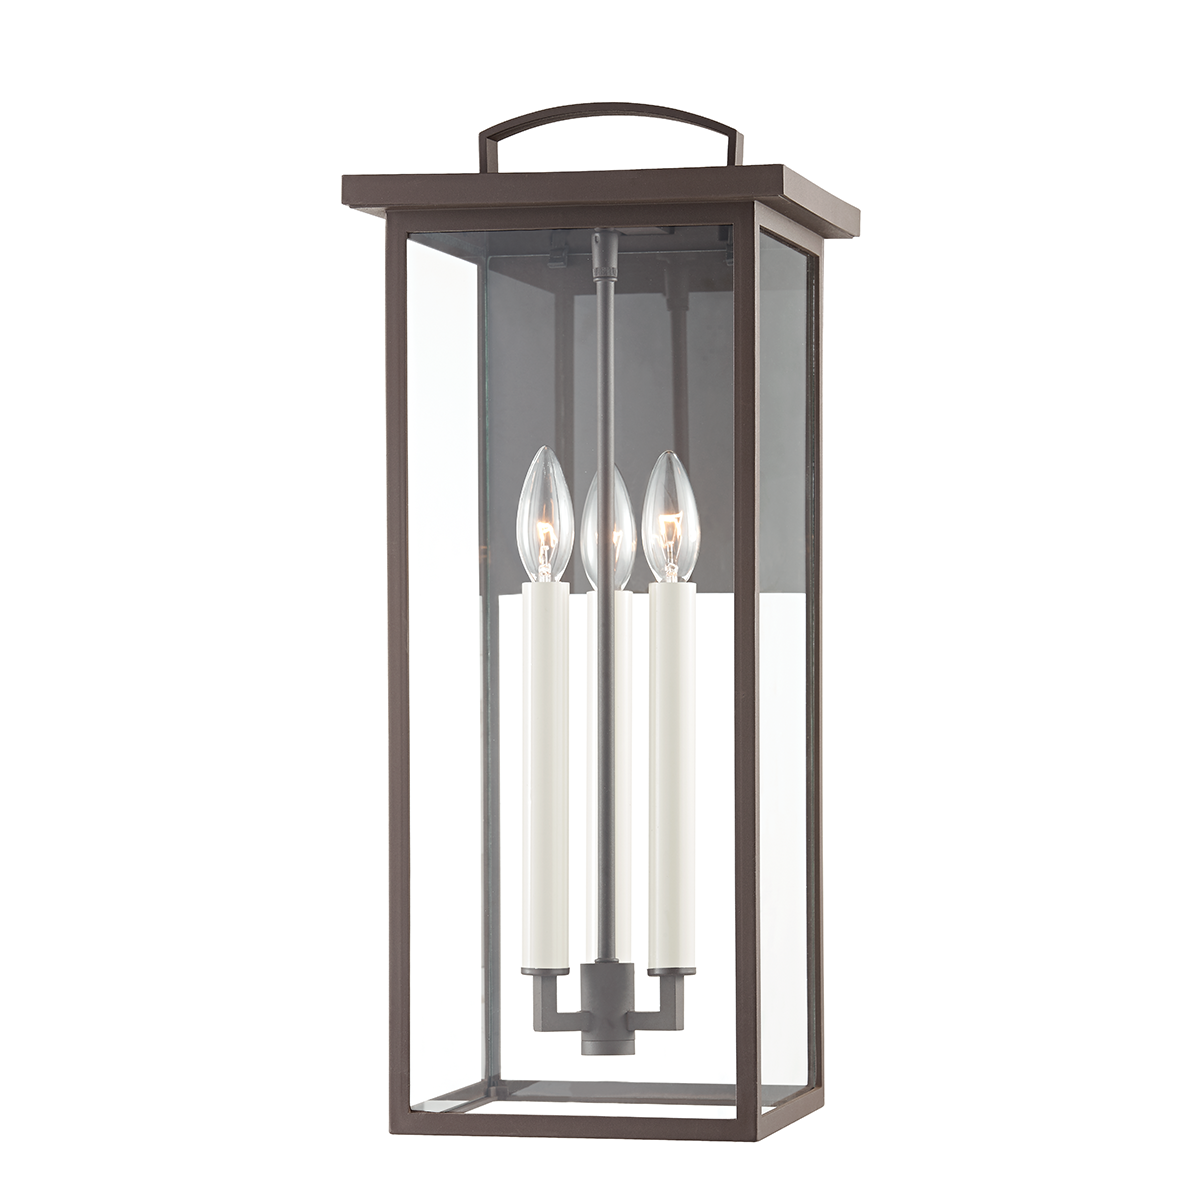 Troy Lighting 3 LIGHT LARGE EXTERIOR WALL SCONCE B7523